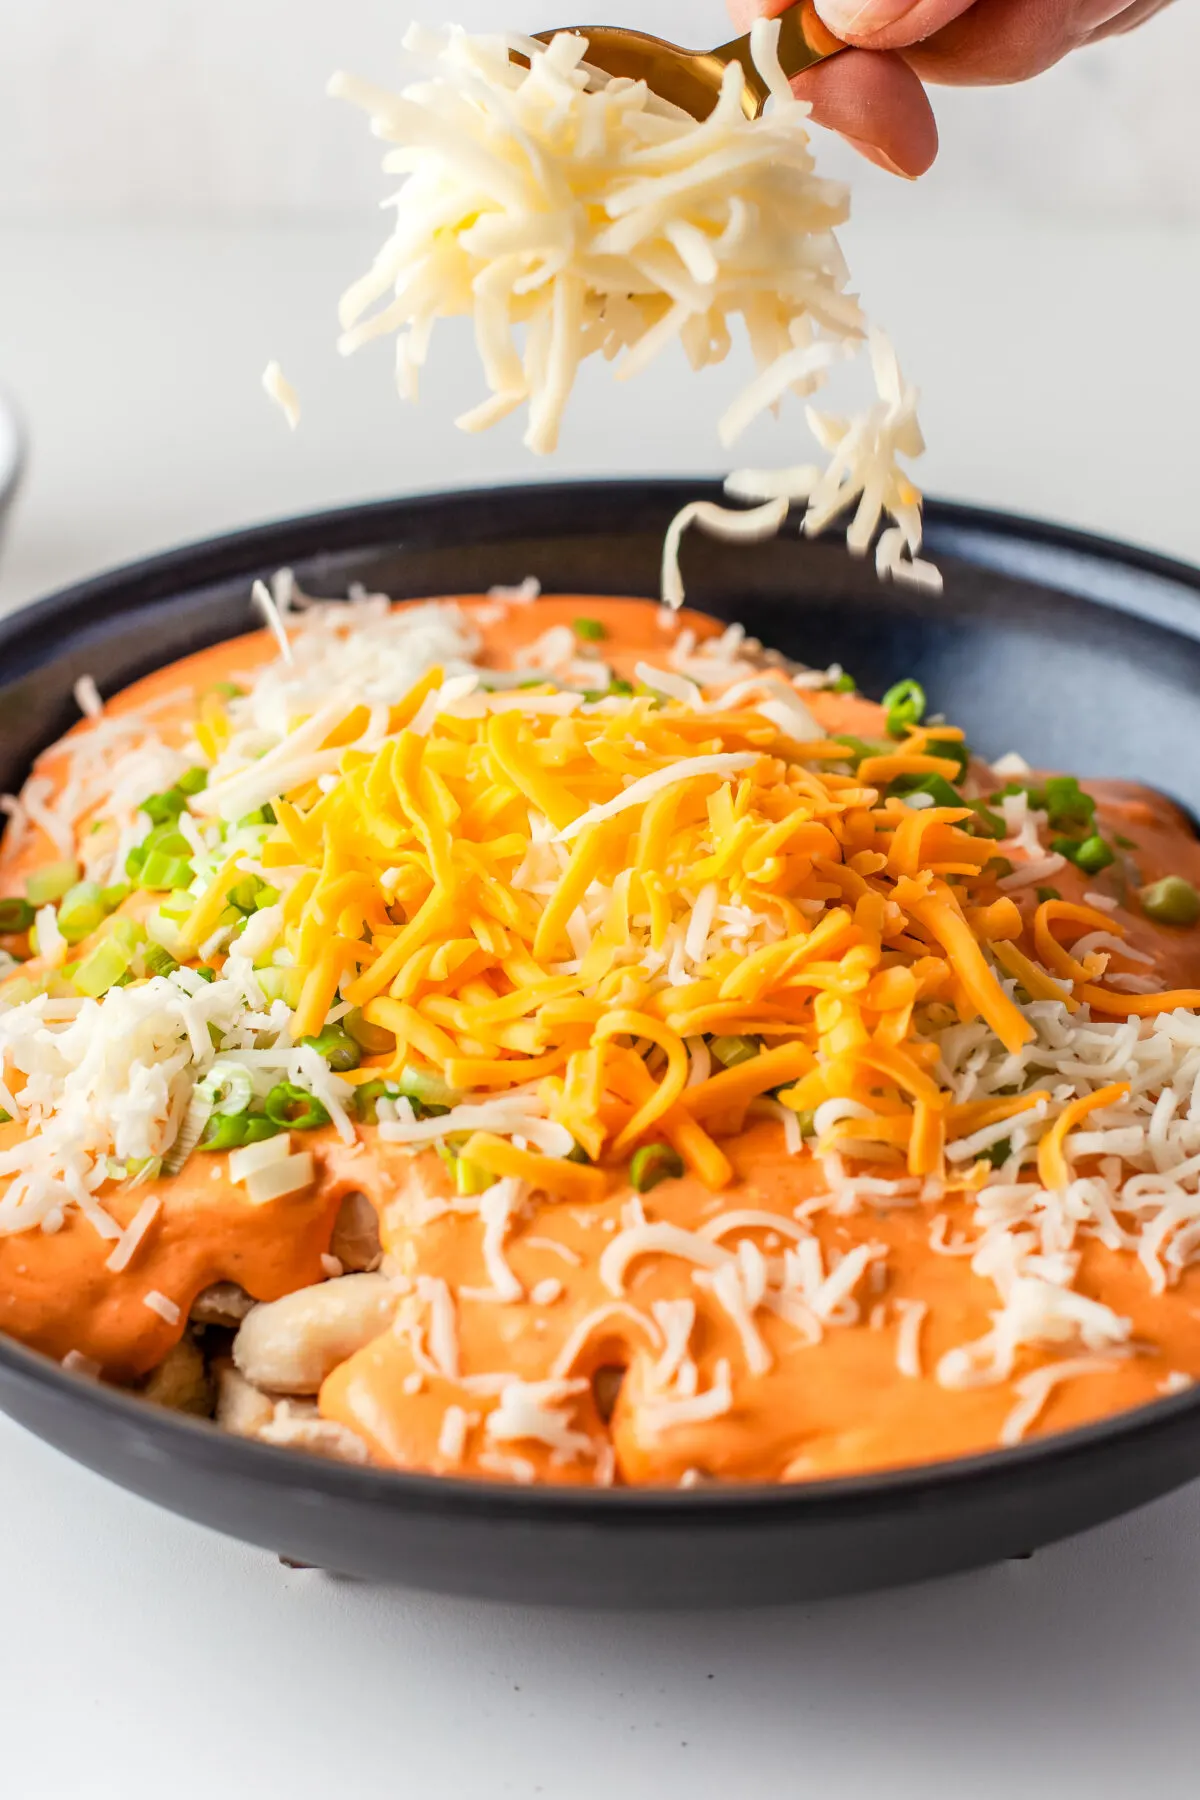 Cheese, chicken and buffalo sauce being combined in a large skillet.